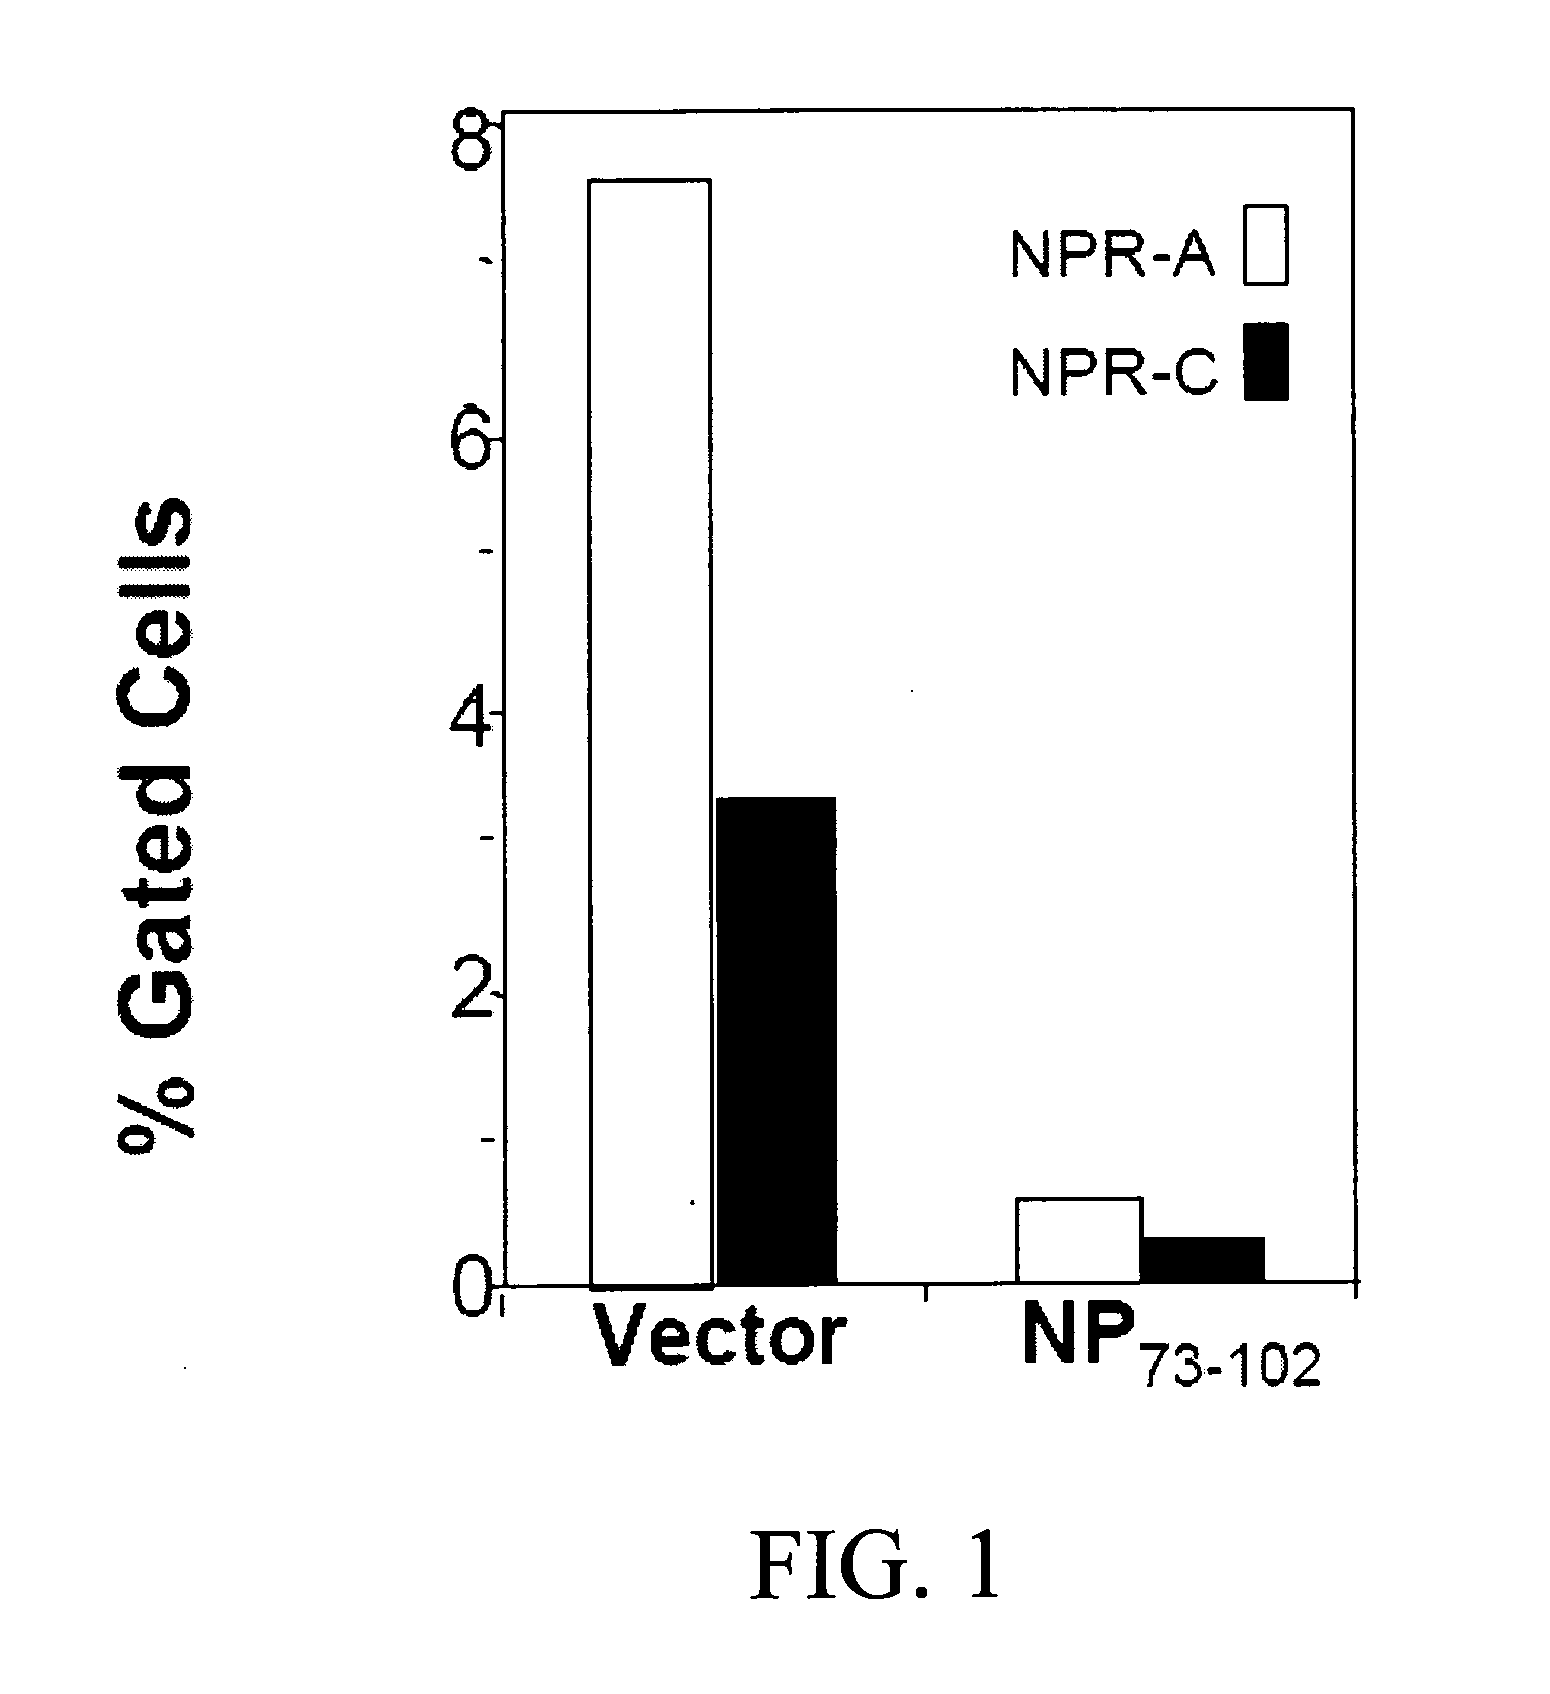 Materials and methods for treatment of inflammatory and cell proliferation disorders